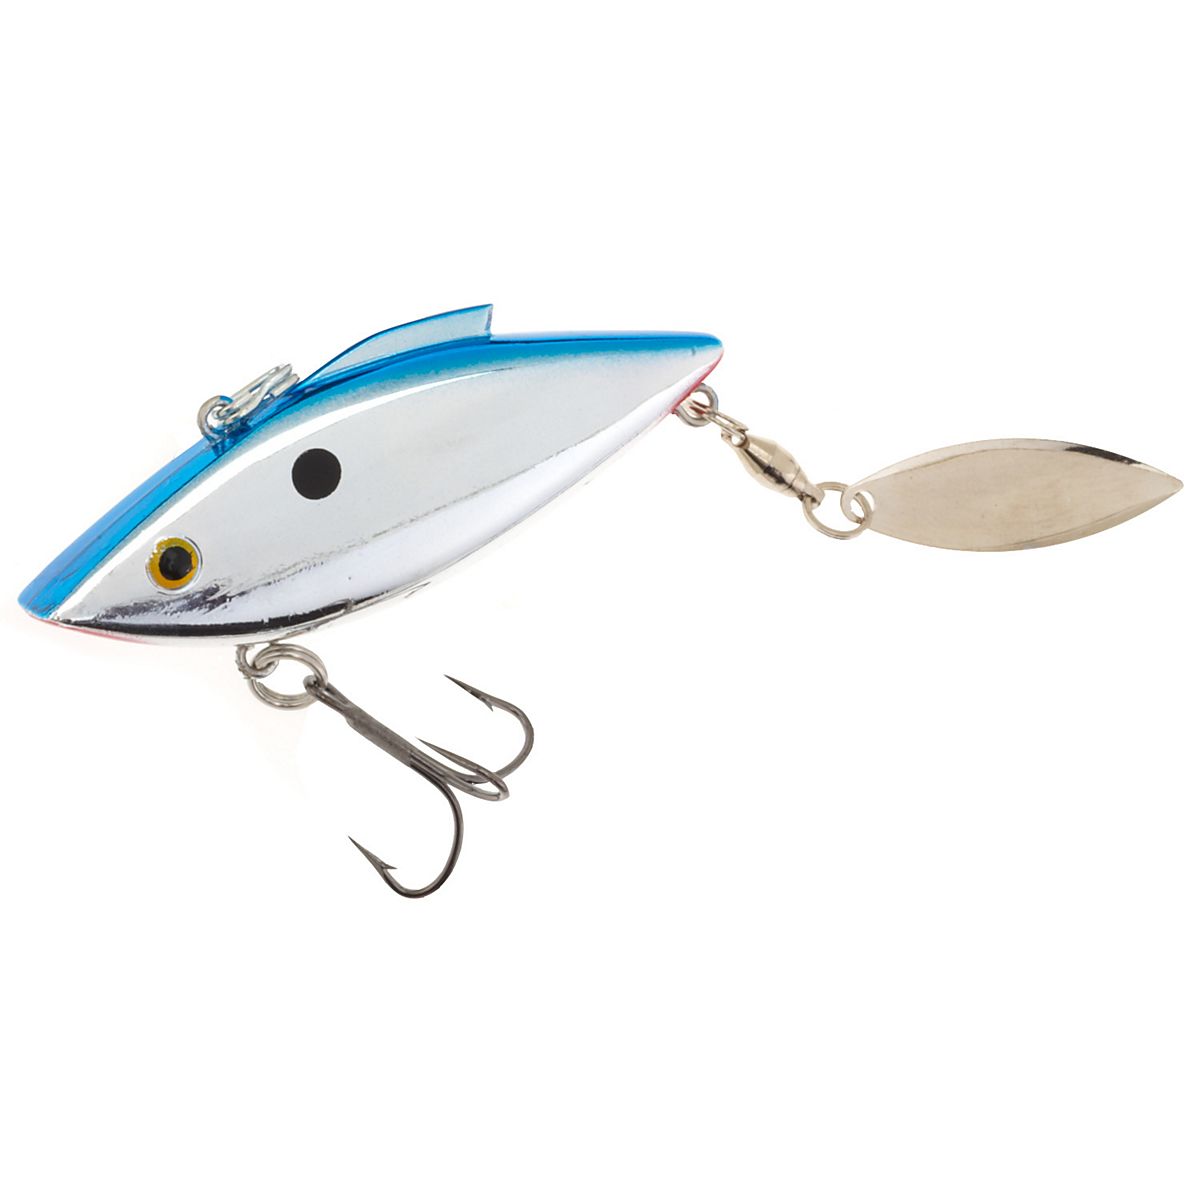  BILL LEWIS Lifelike Vibrations Rat-L-Trap Super-Trap 1 1/2 OZ  Lipless Crankbait Fishing Wobble Sinking Lure for Freshwater, LECTRIC  SILVER/NO PATTERN : Fishing Diving Lures : Sports & Outdoors